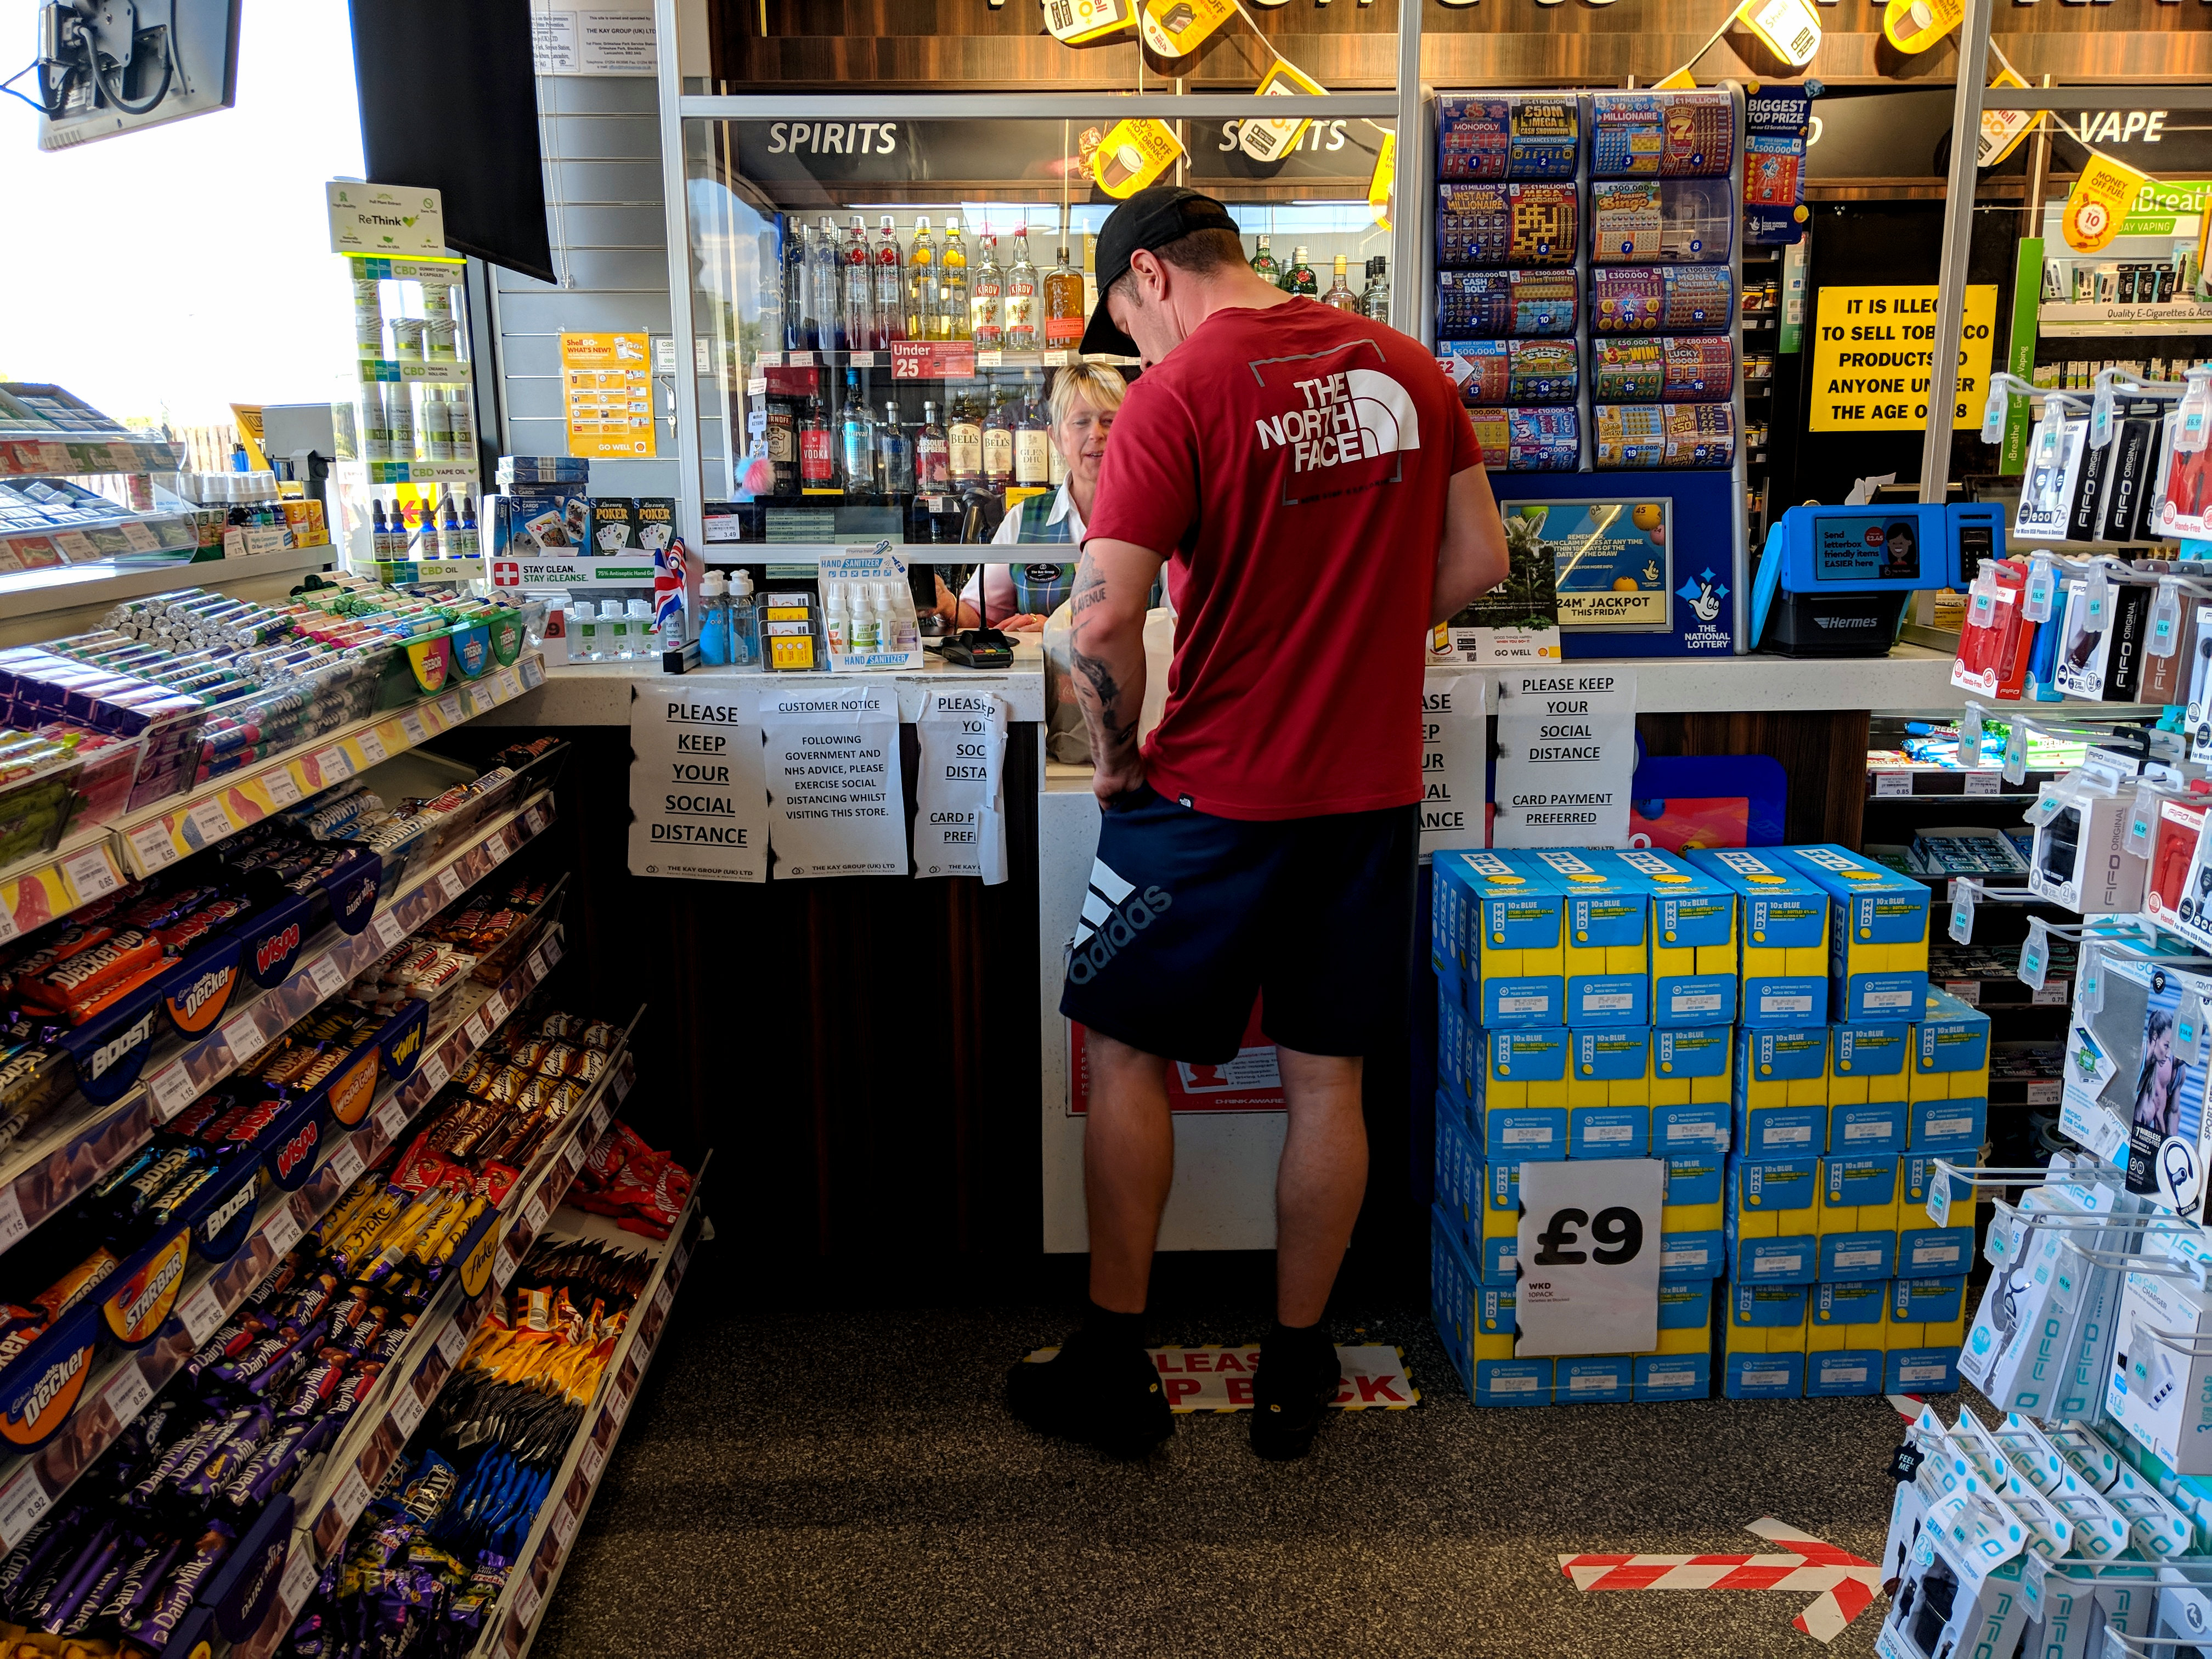 Man is shopping at the gas station | Source: Shutterstock.com